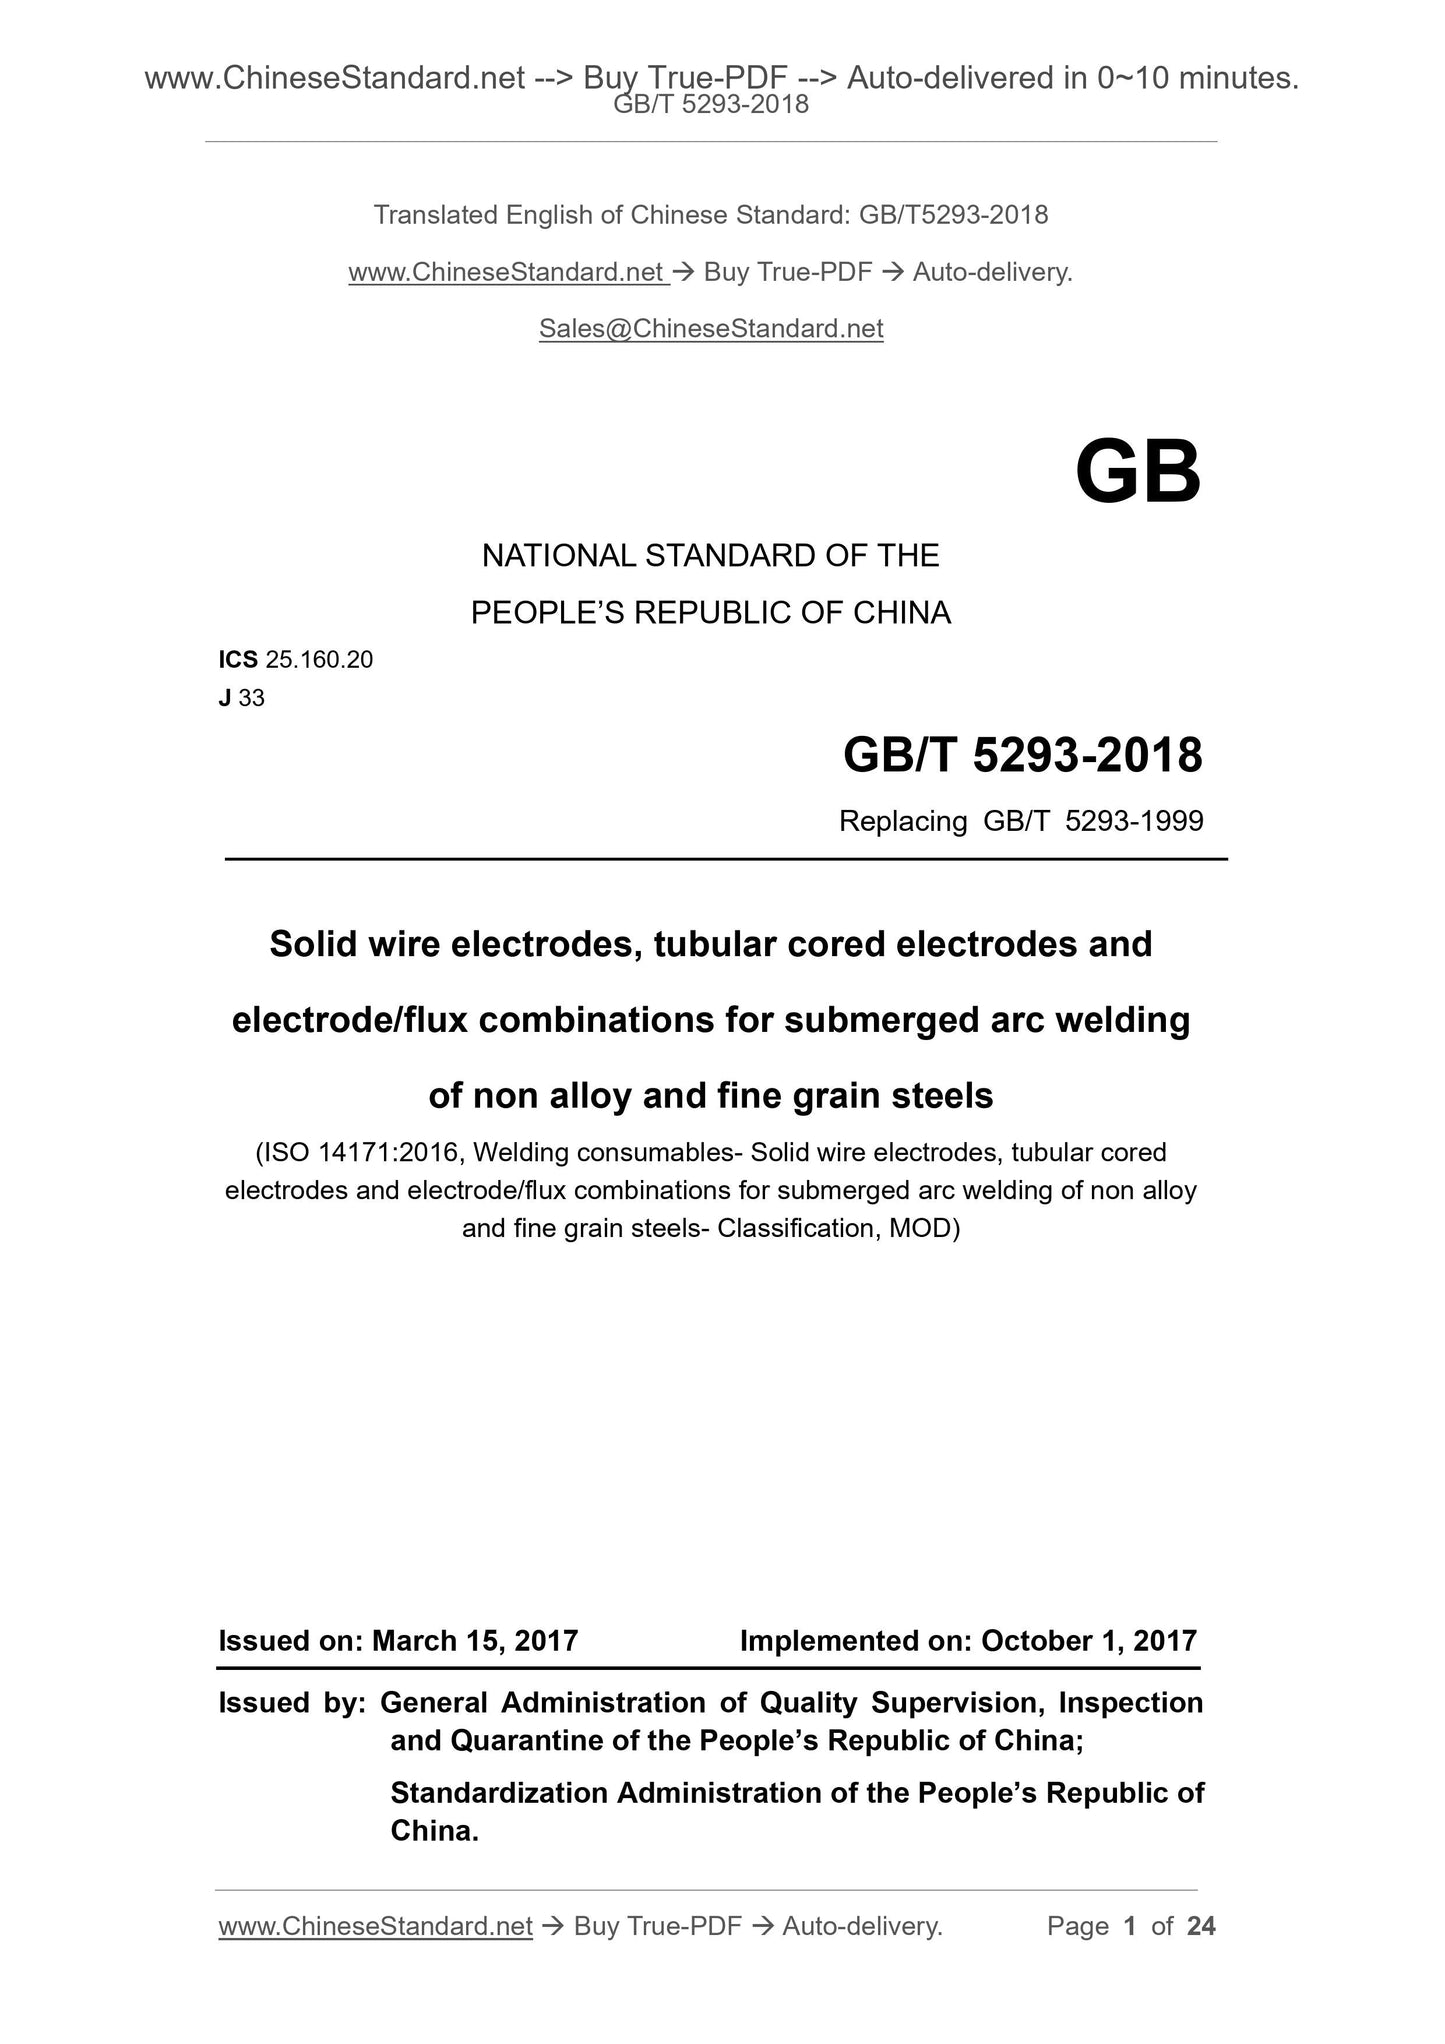 GB/T 5293-2018 Page 1